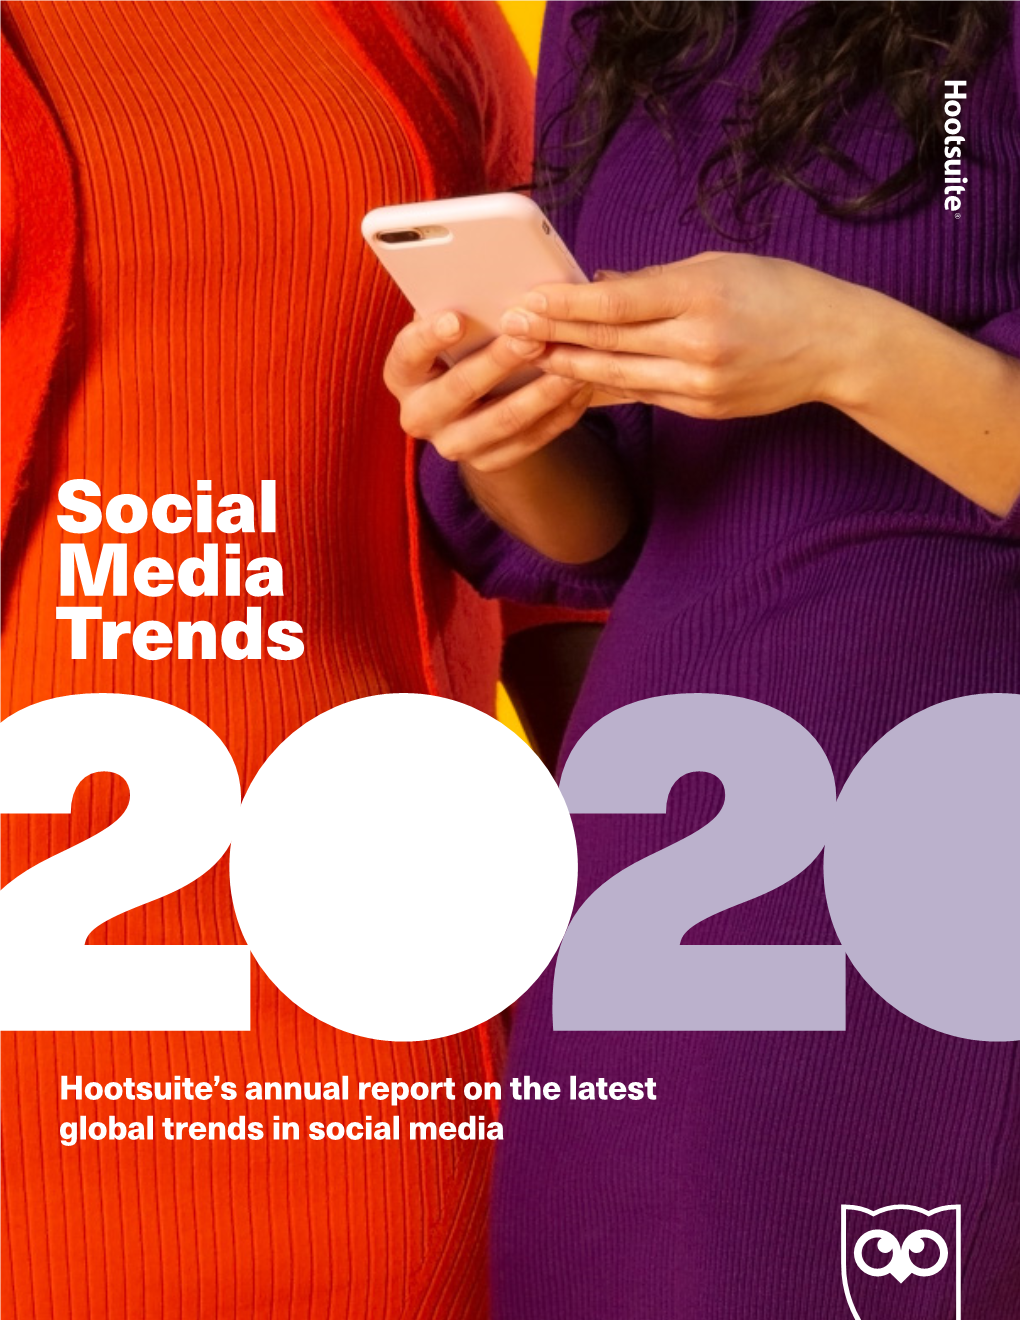 SOCIAL MEDIA TRENDS 2020 SURVEY 23 the Trend in Action SOCIAL and PERFORMANCE MARKETING